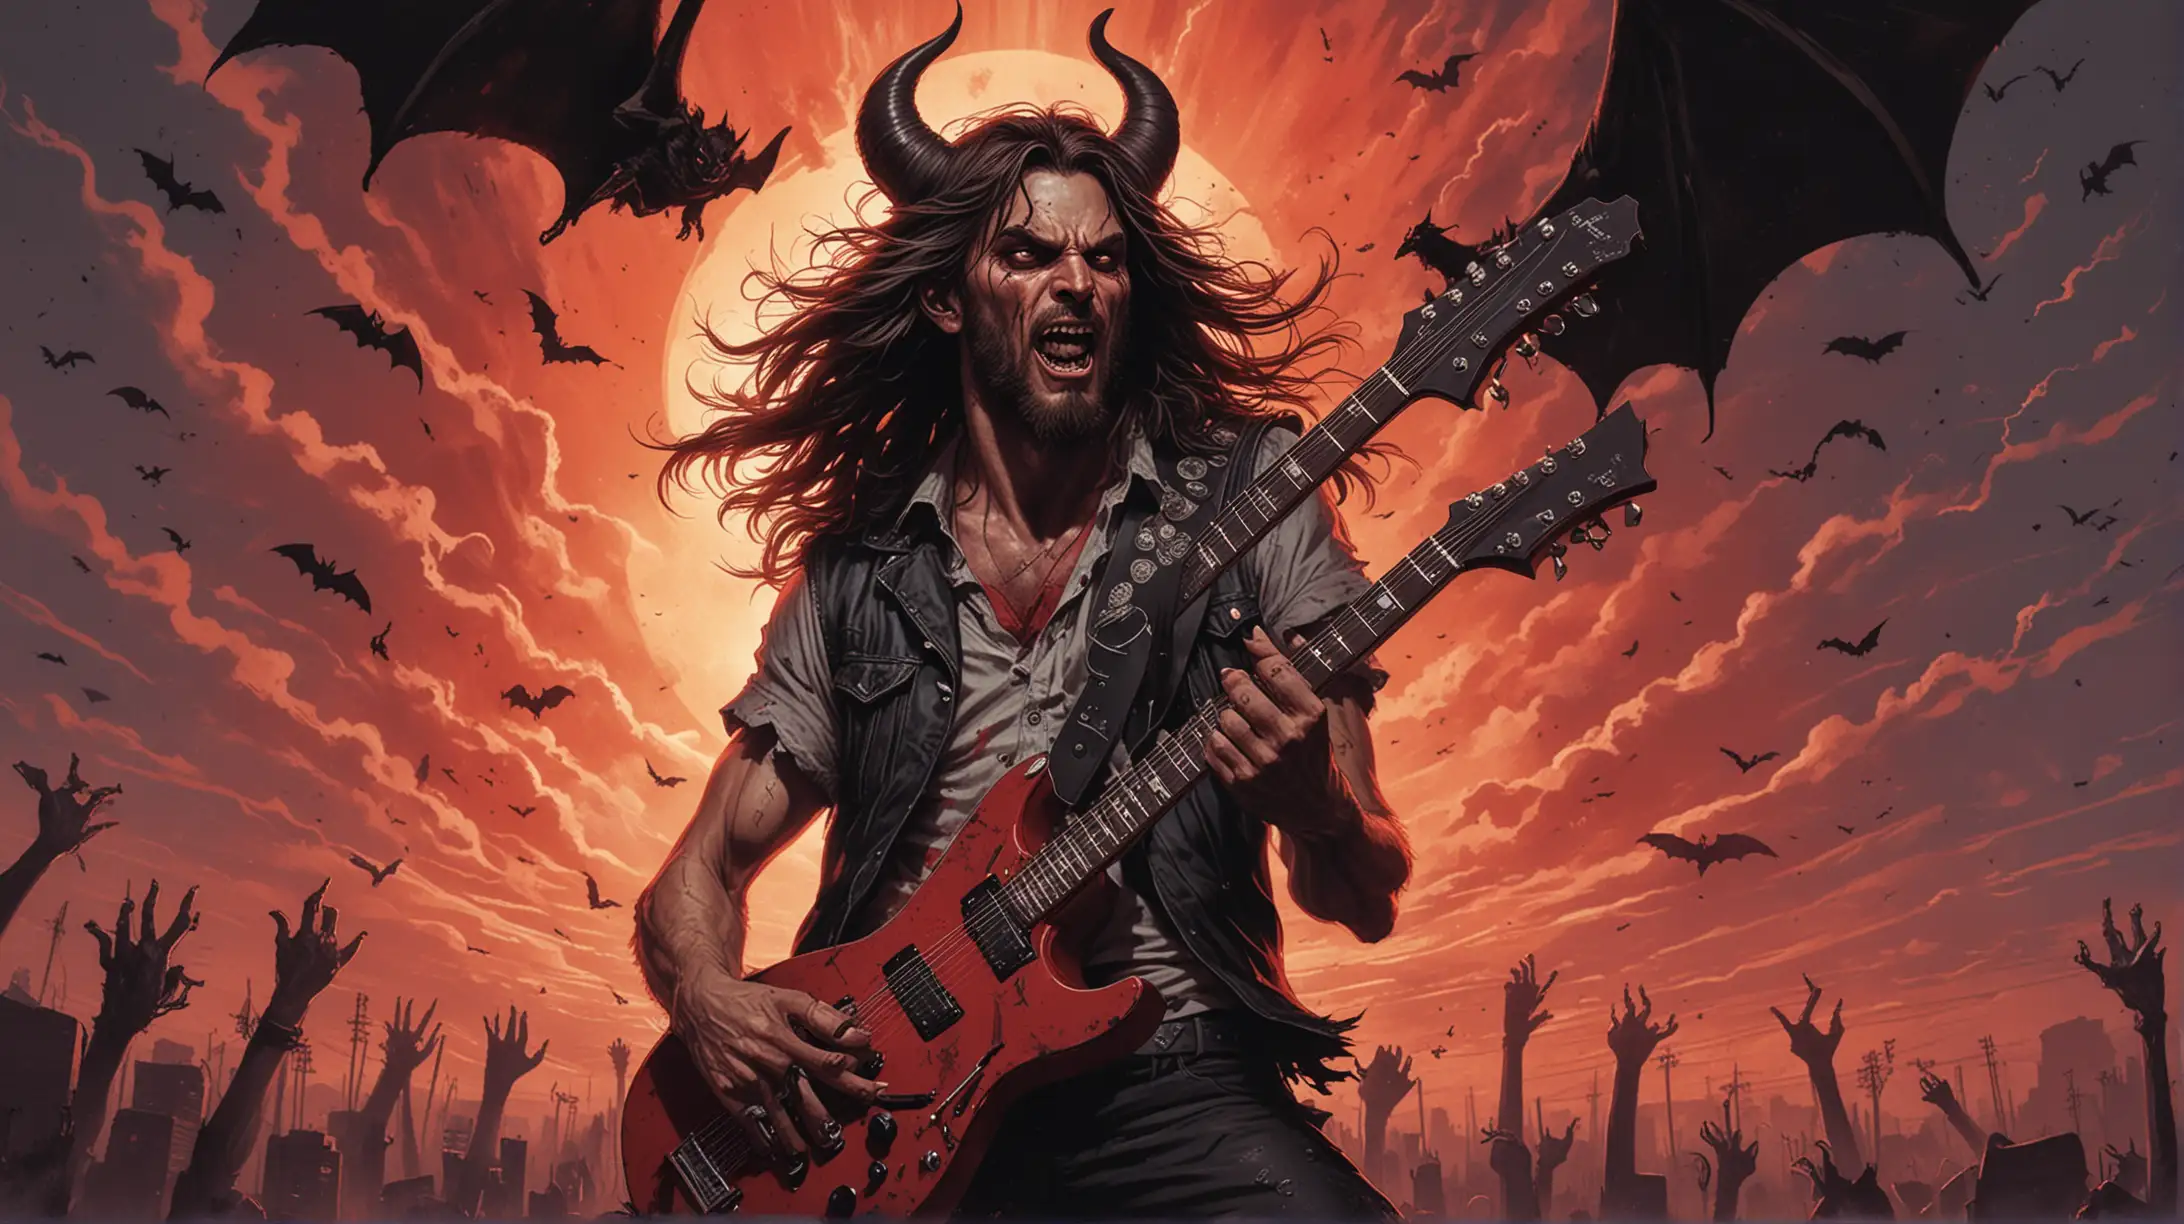 Sinister Guitarist in Devilish Atmosphere with Bats and Red Sky Lightning